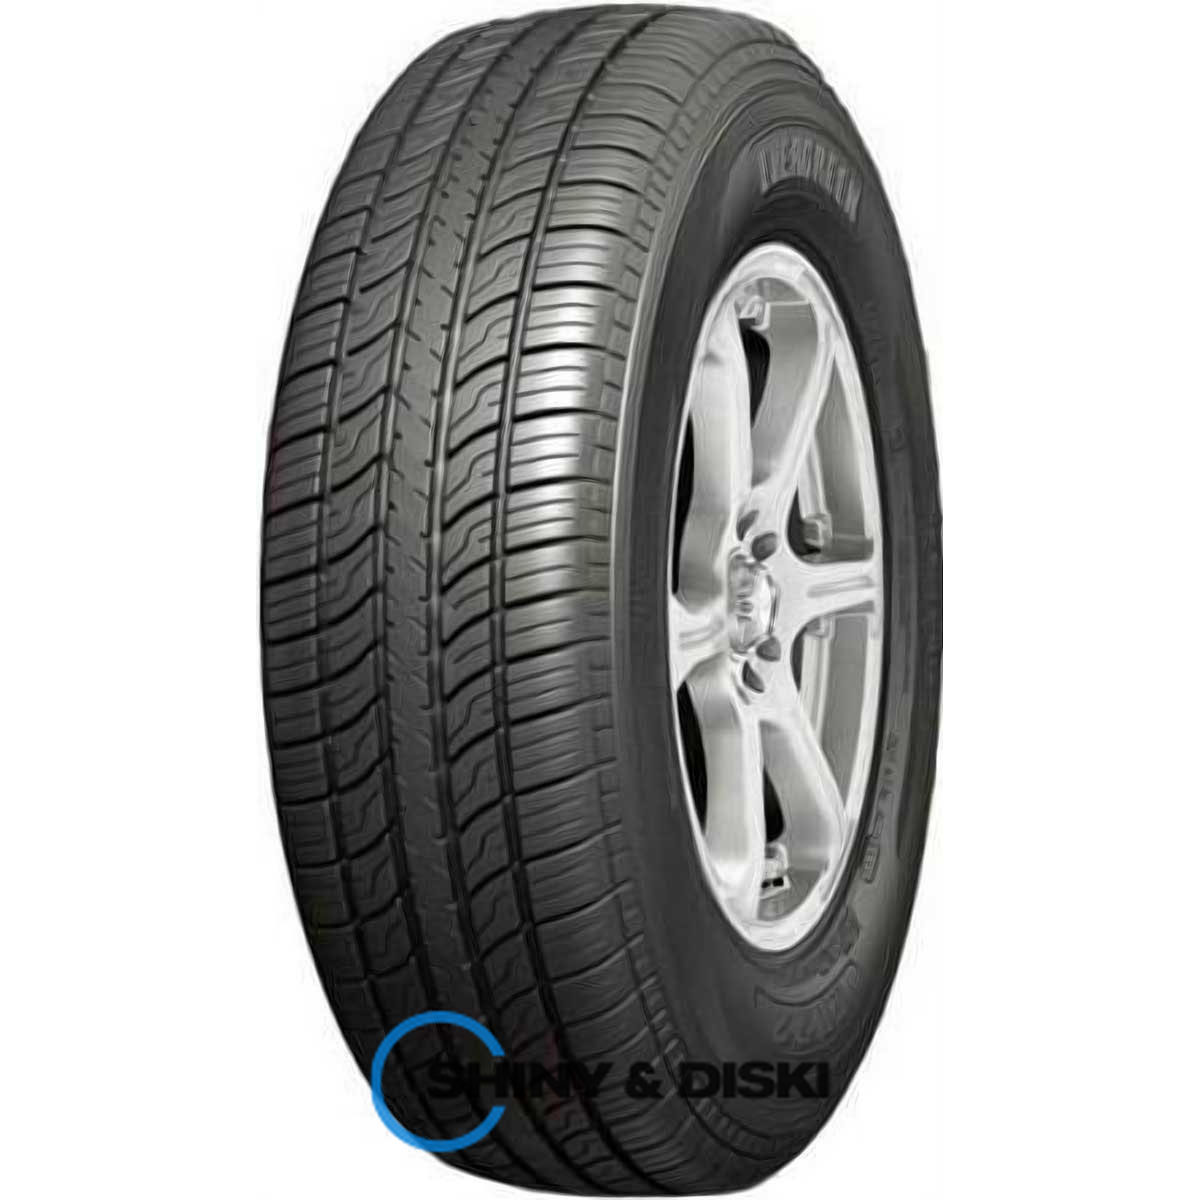 evergreen eh22 165/70 r14 85t